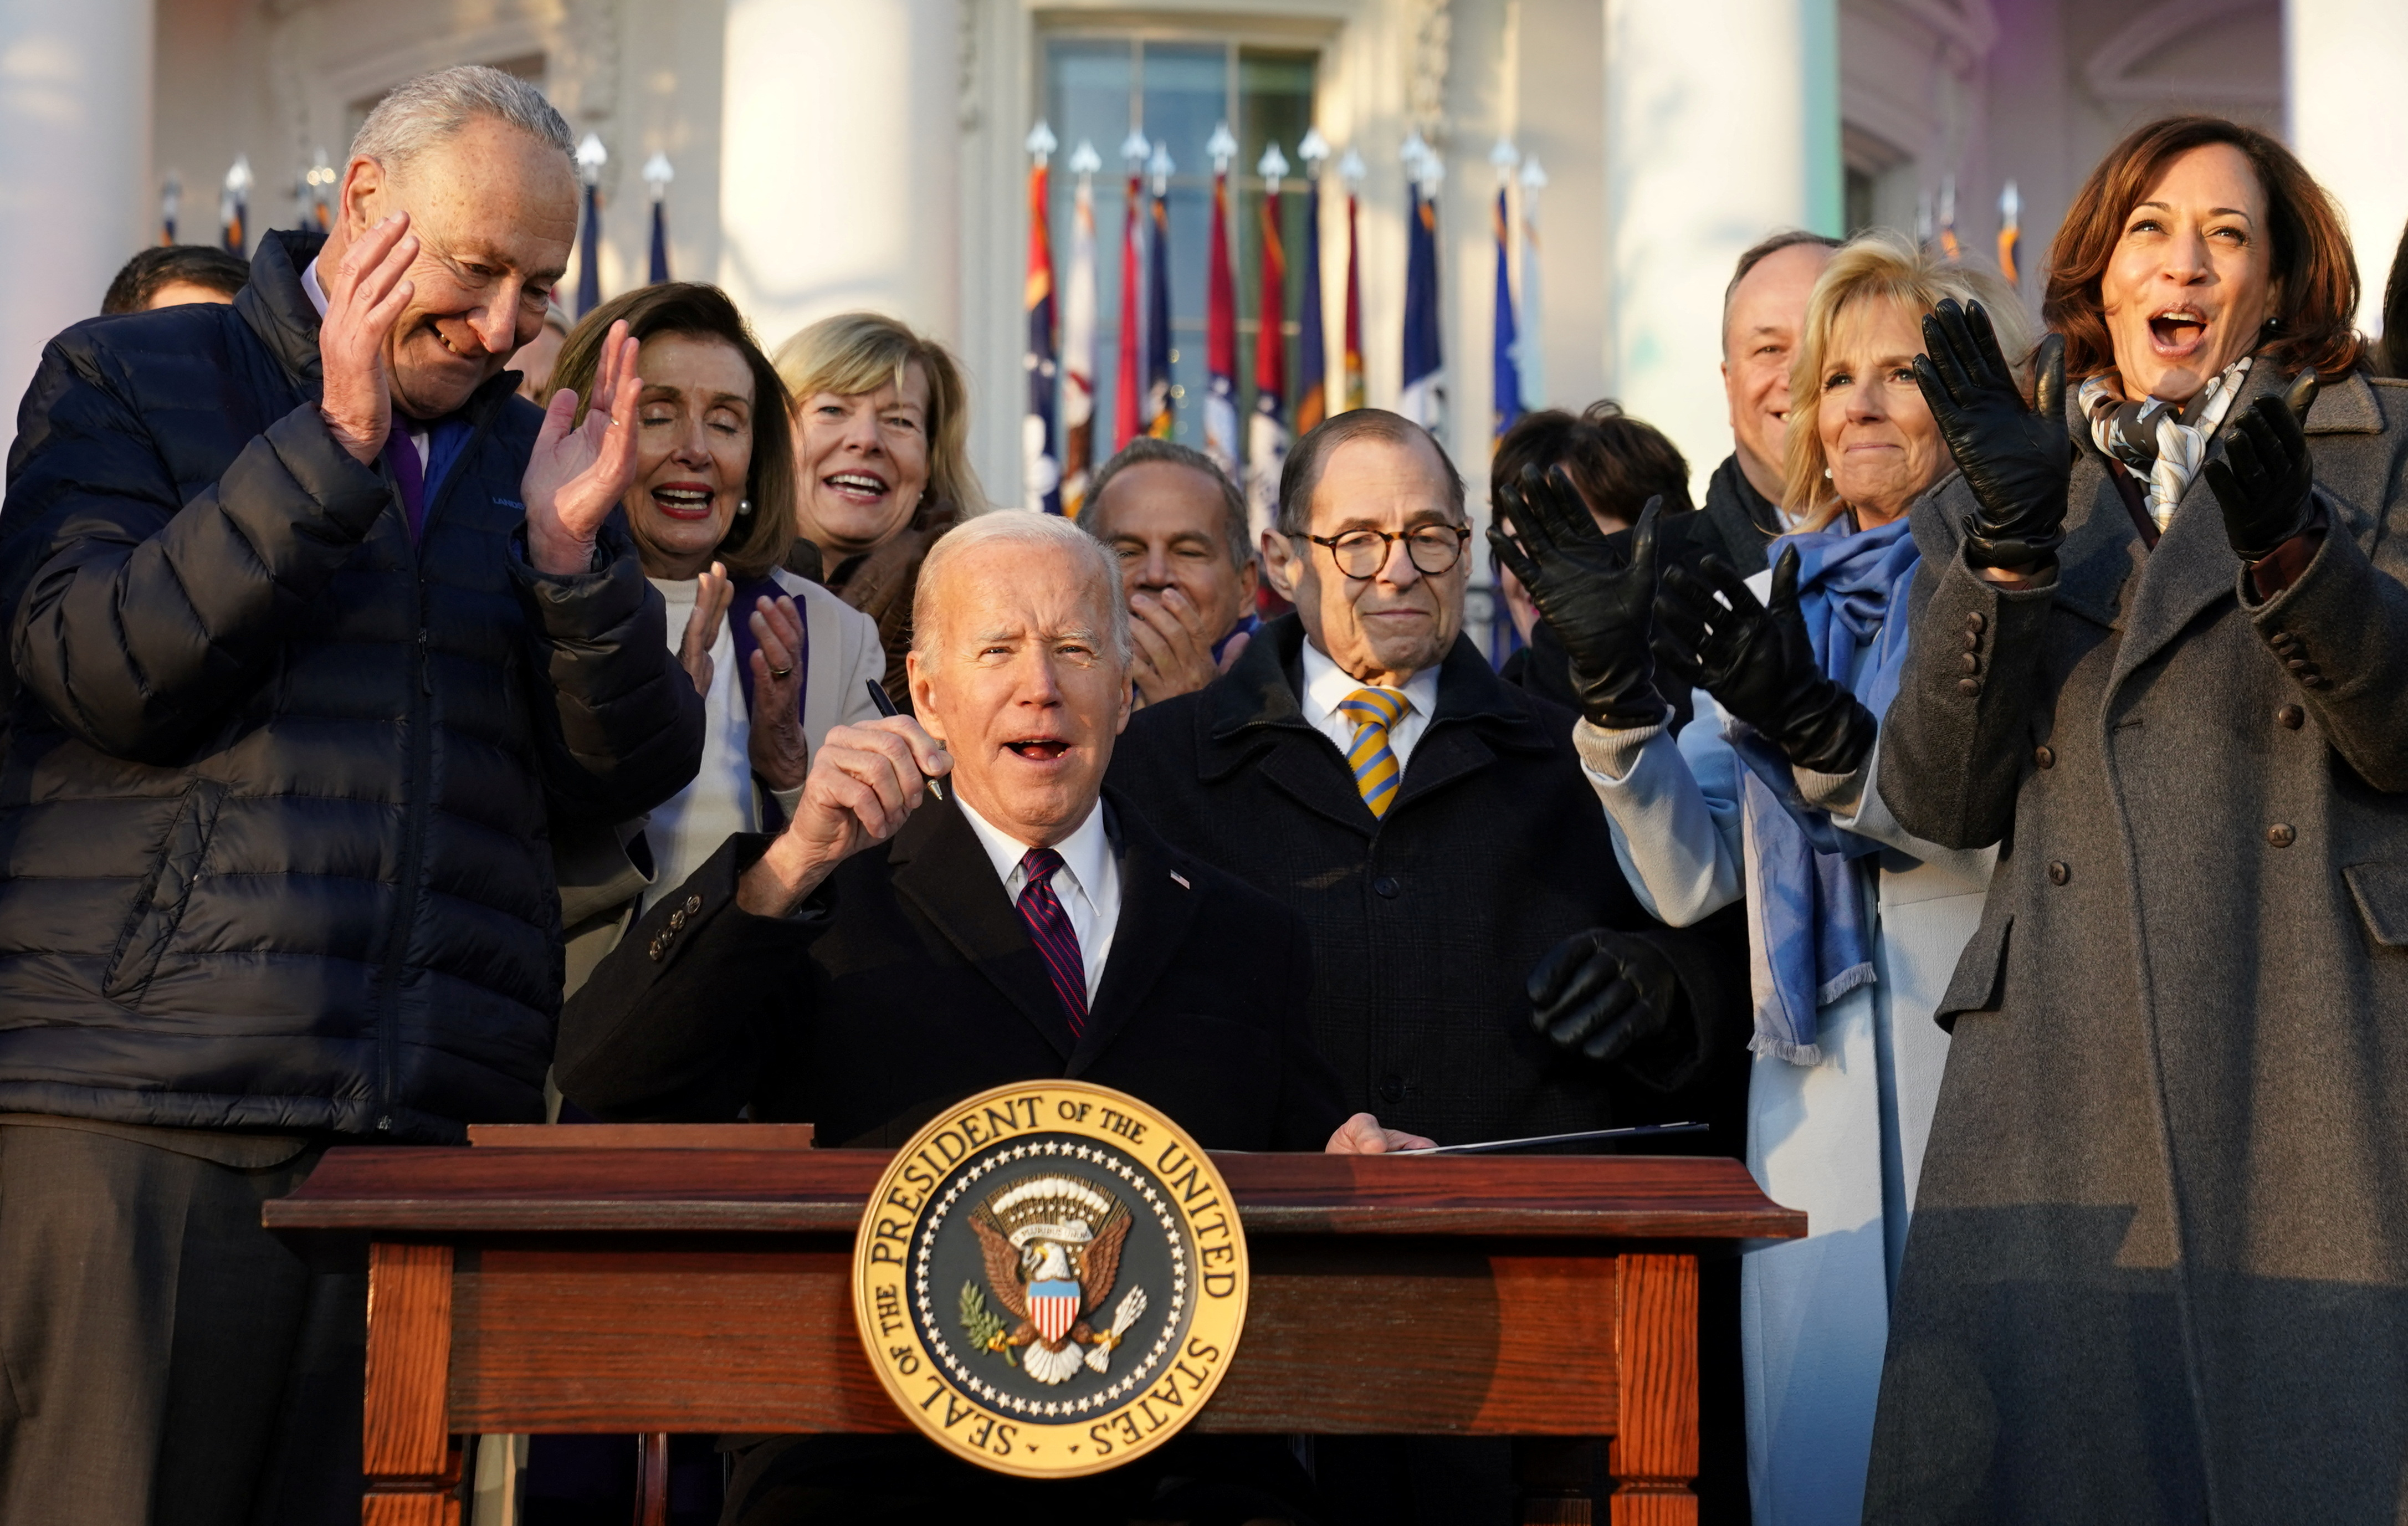 U.S. President Biden signs "Respect for Marriage Act" at the White House in Washington